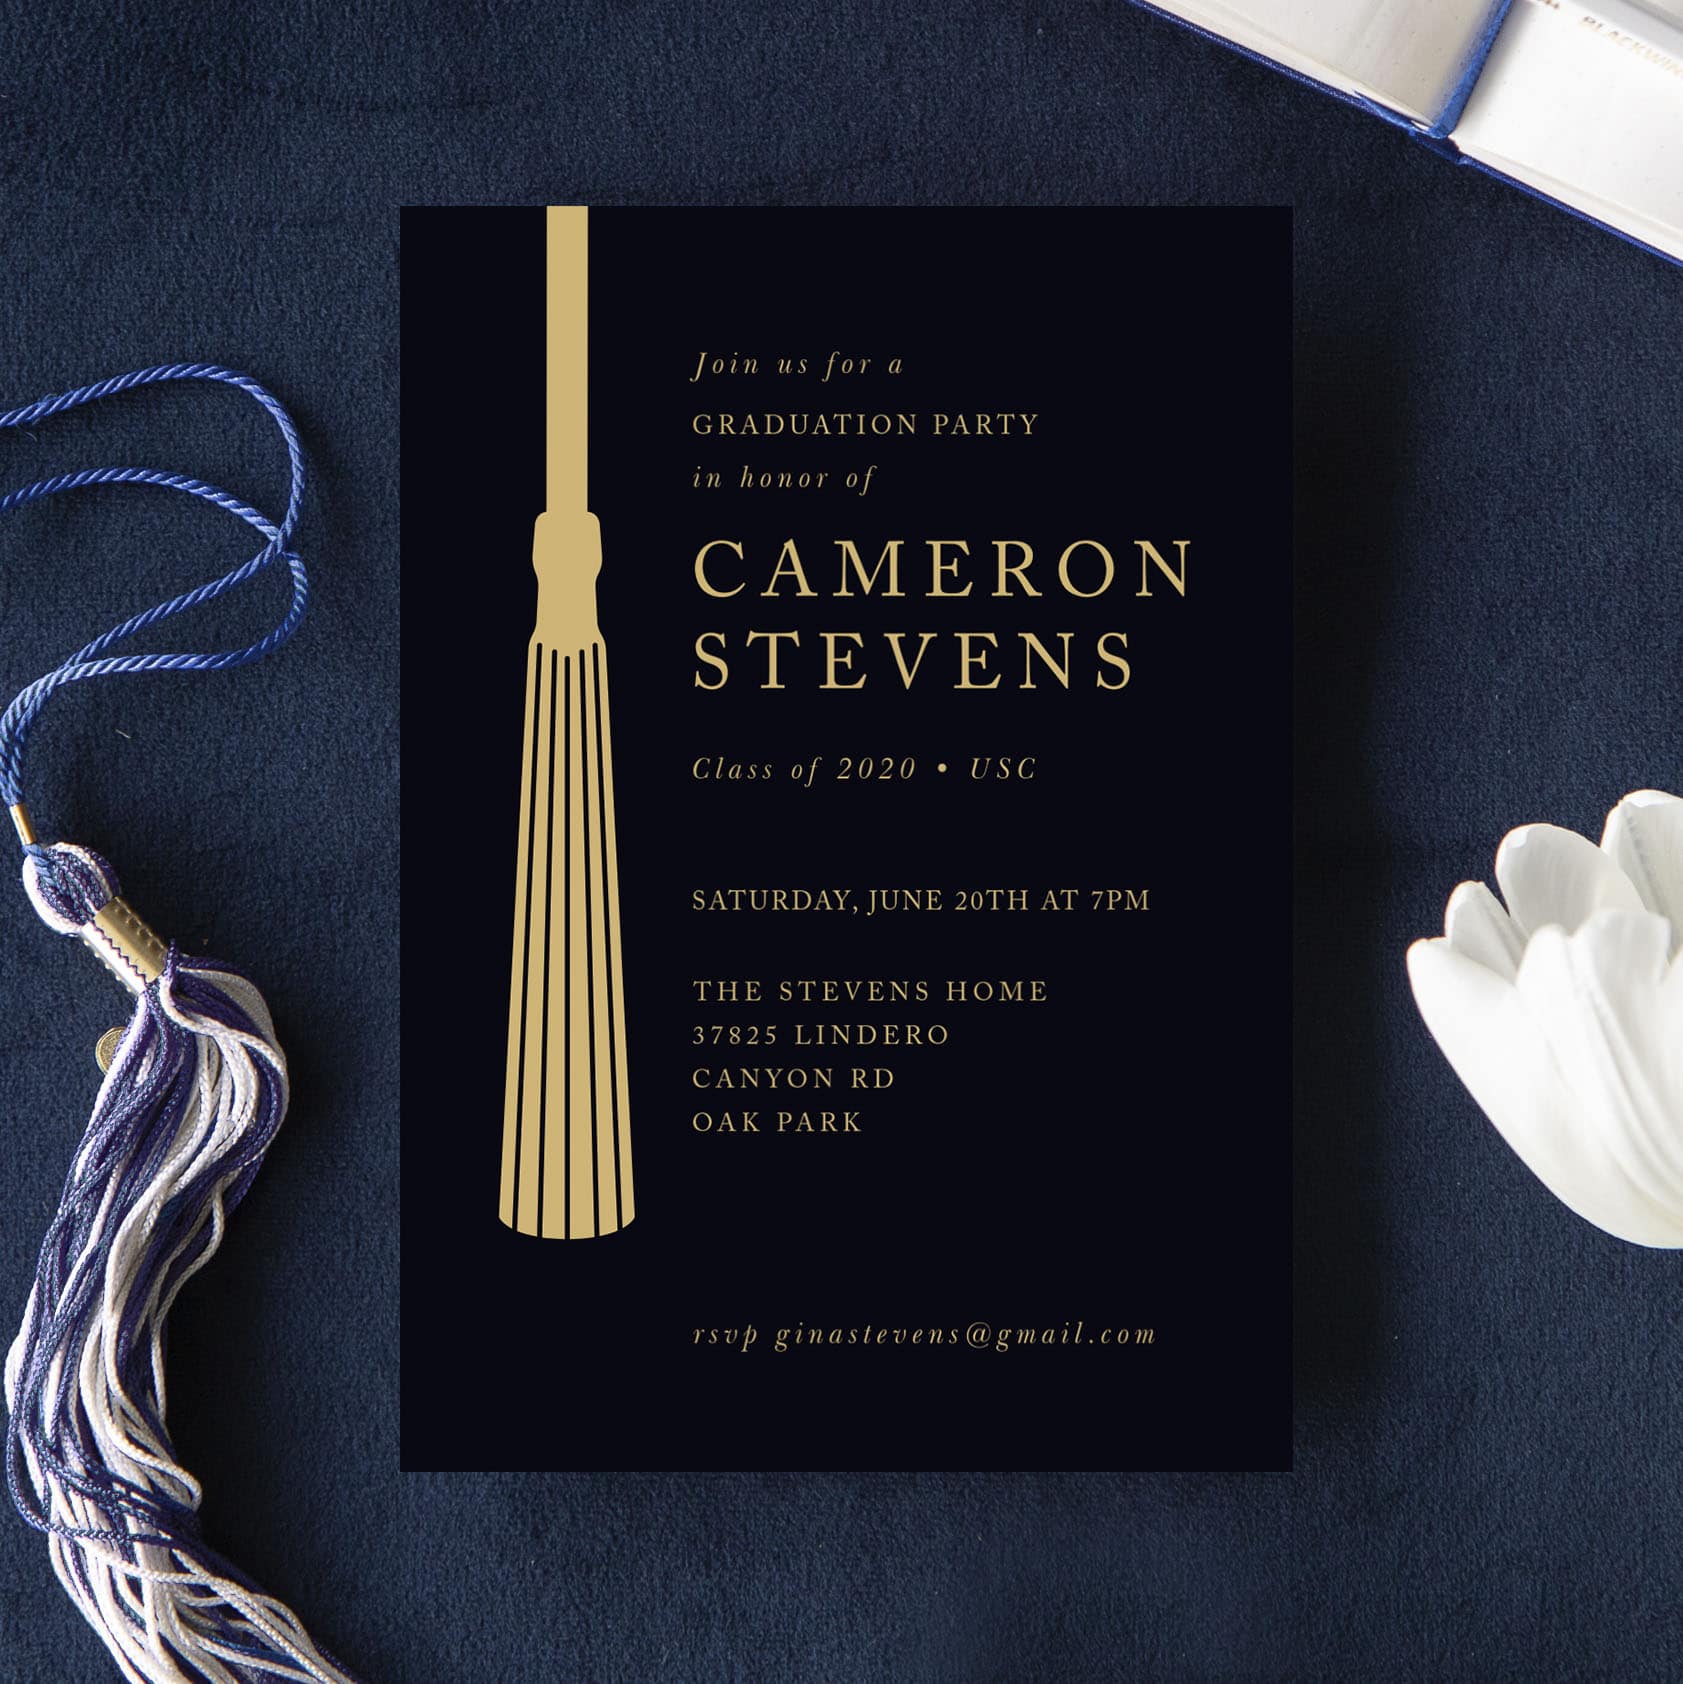 Navy Velvet6 - Find Some Useful Tips on College Graduation Announcements & Invitations